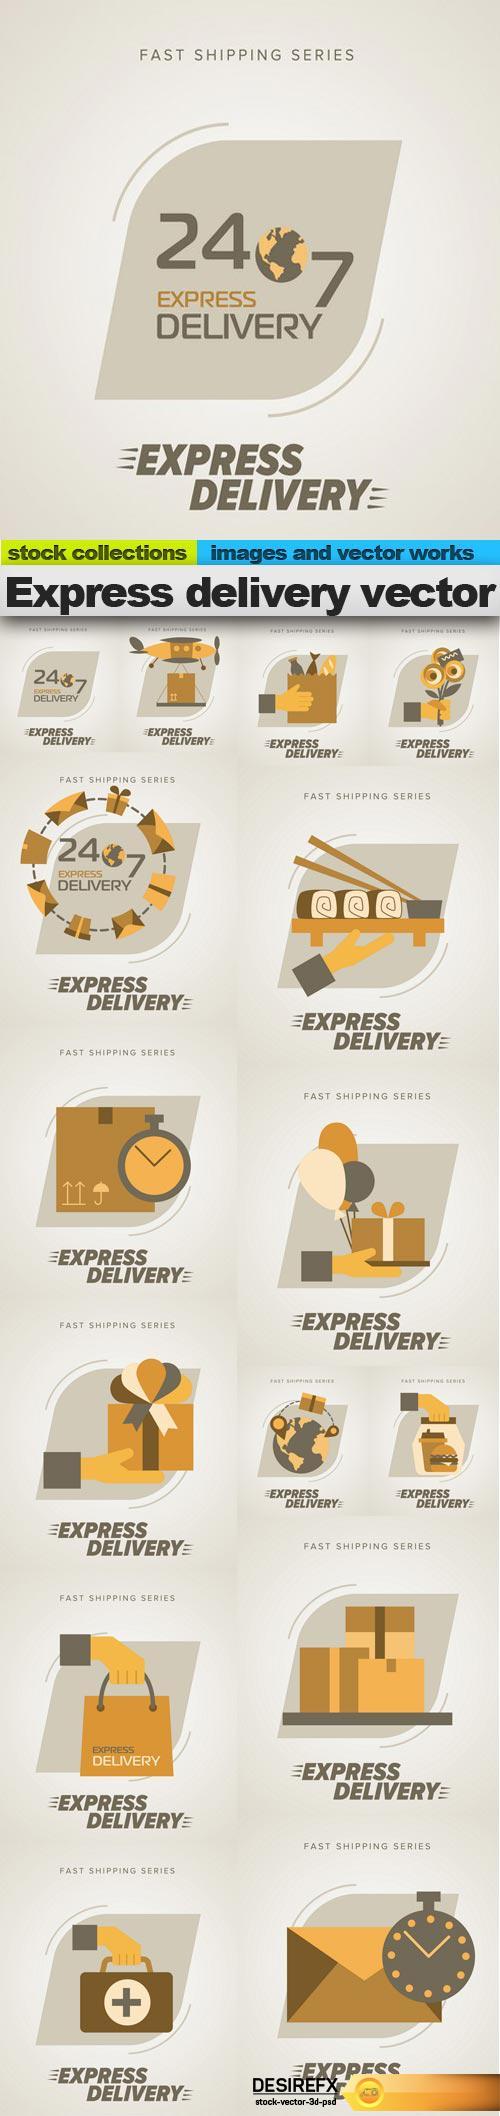 Express delivery vector, 15 x EPS